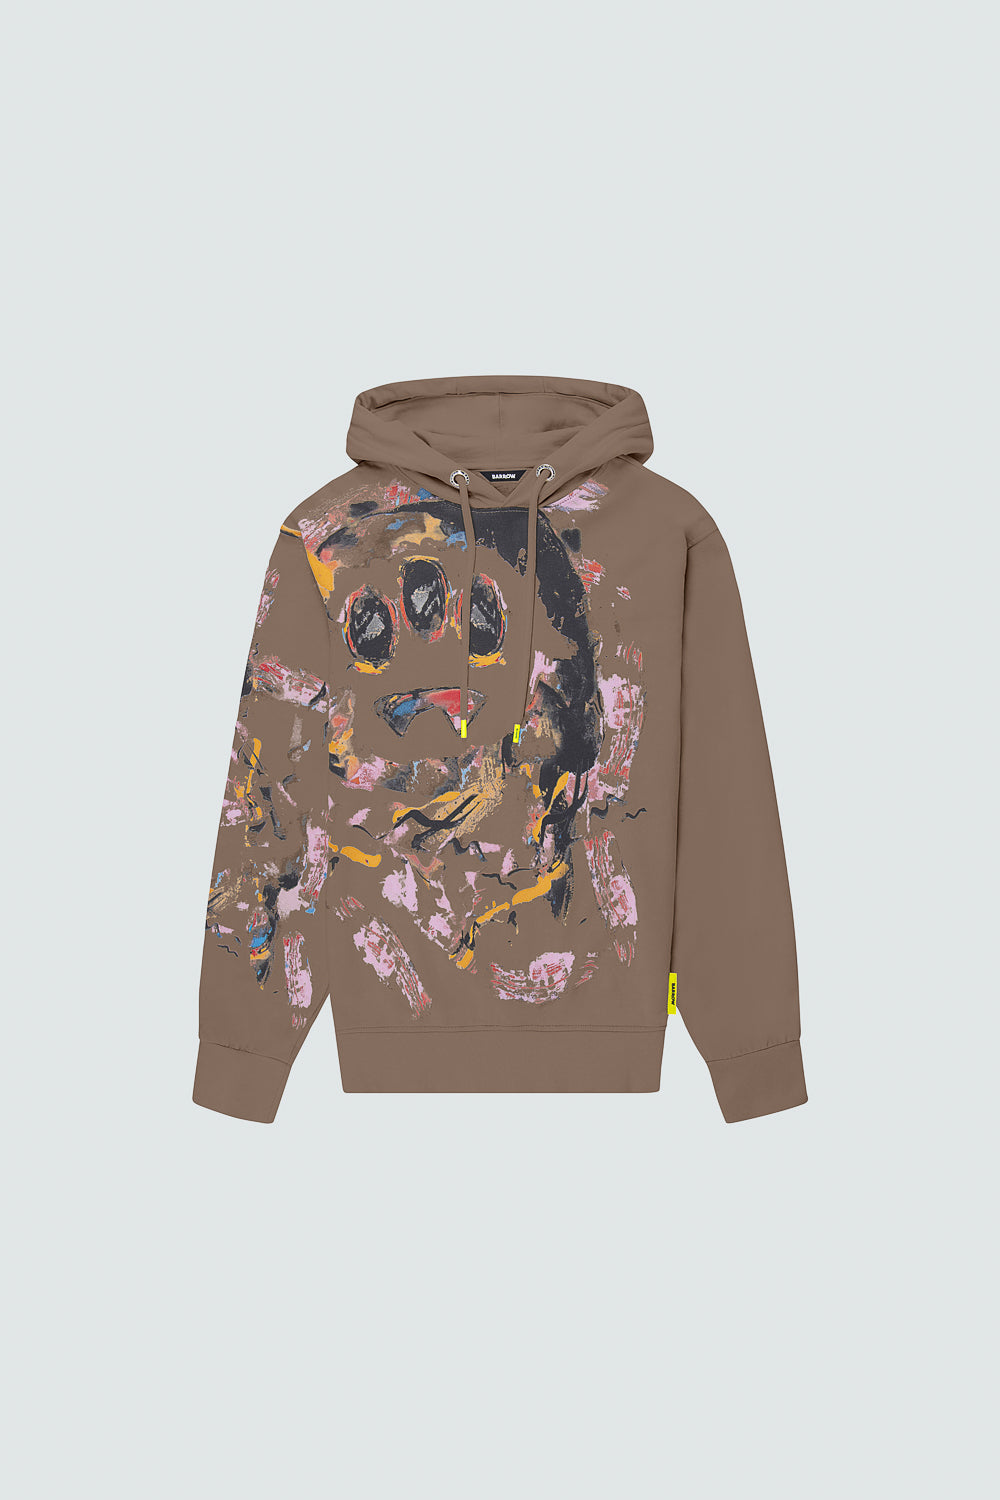 Buy the Painted Logo Hoodie in Camel at Intro. Spend £50 for free UK delivery. Official stockists. We ship worldwide.